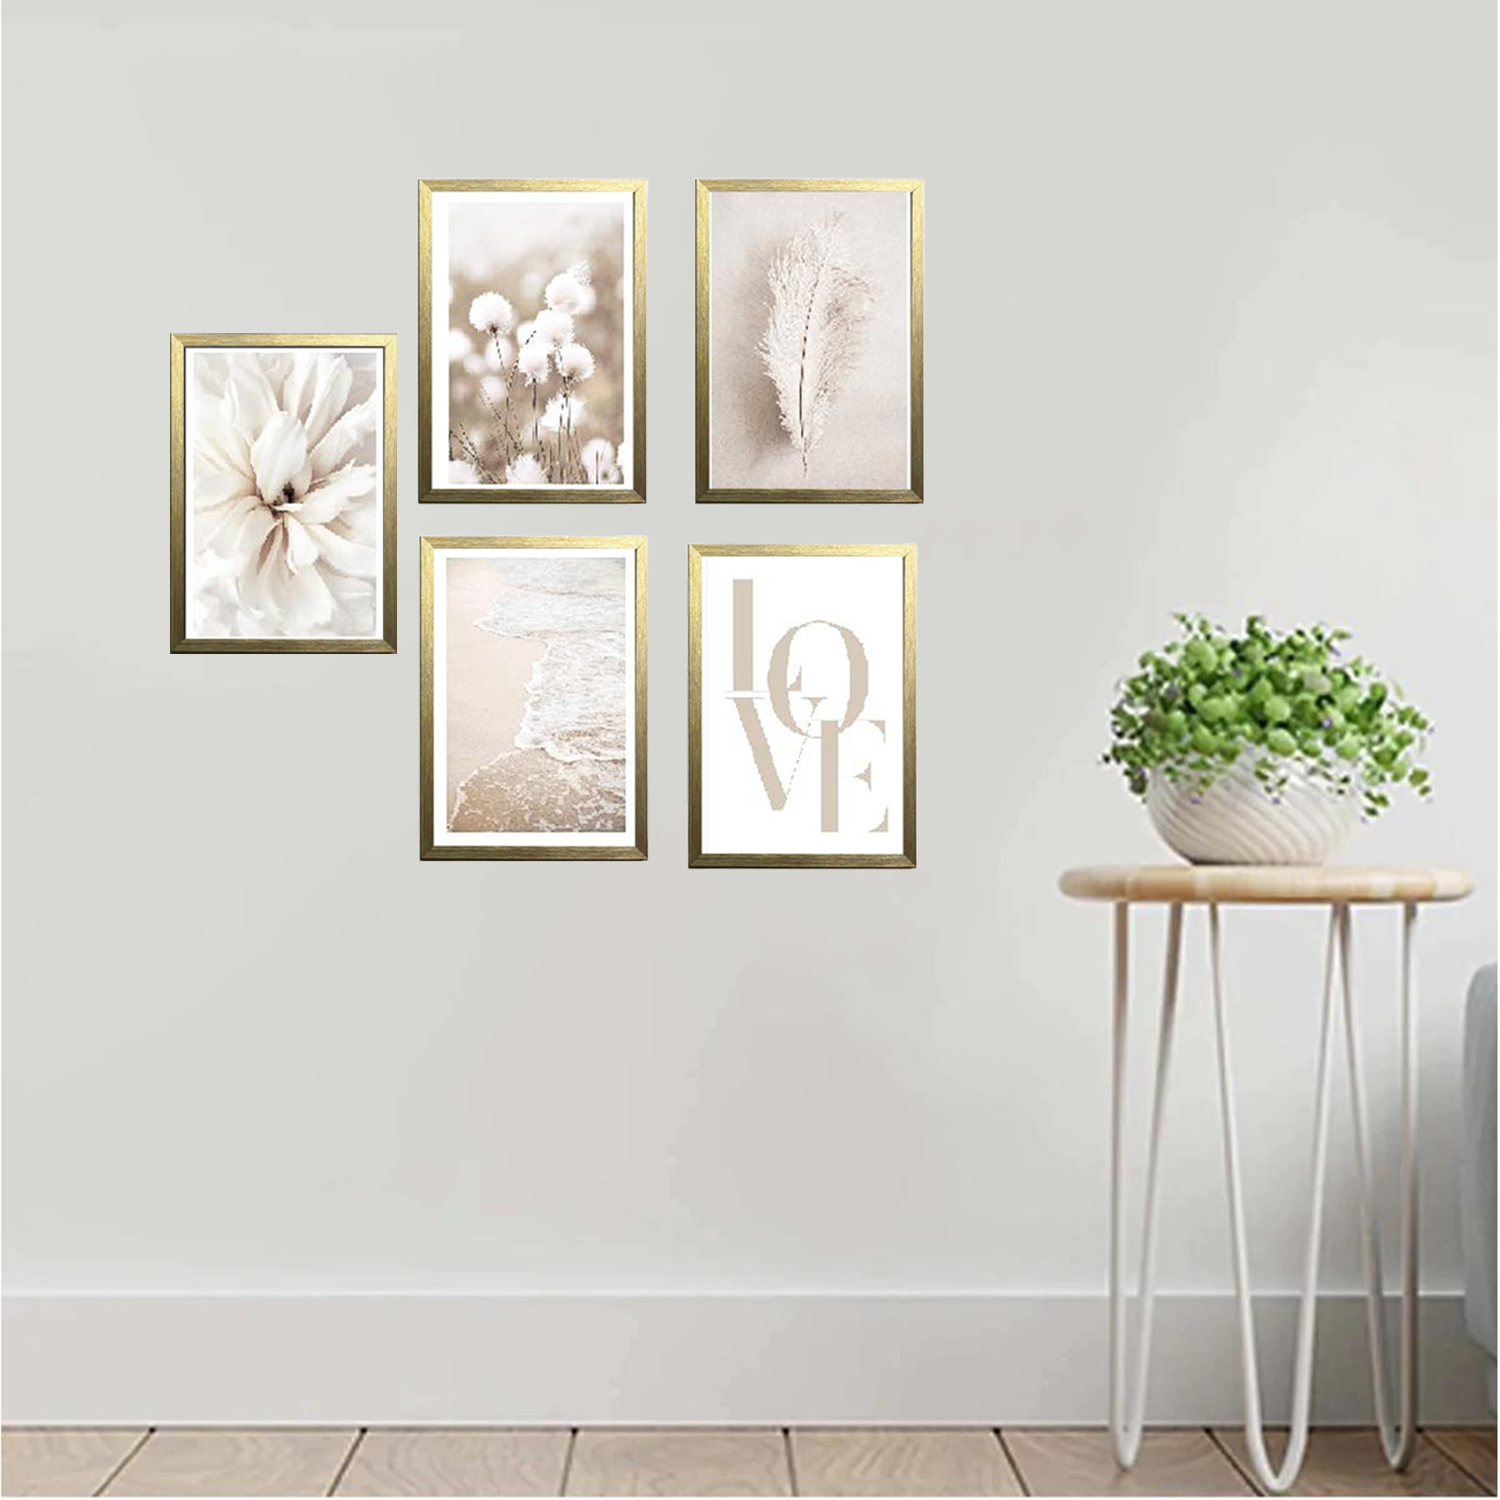 Set of 5 Abstract Wall Hanging Frames